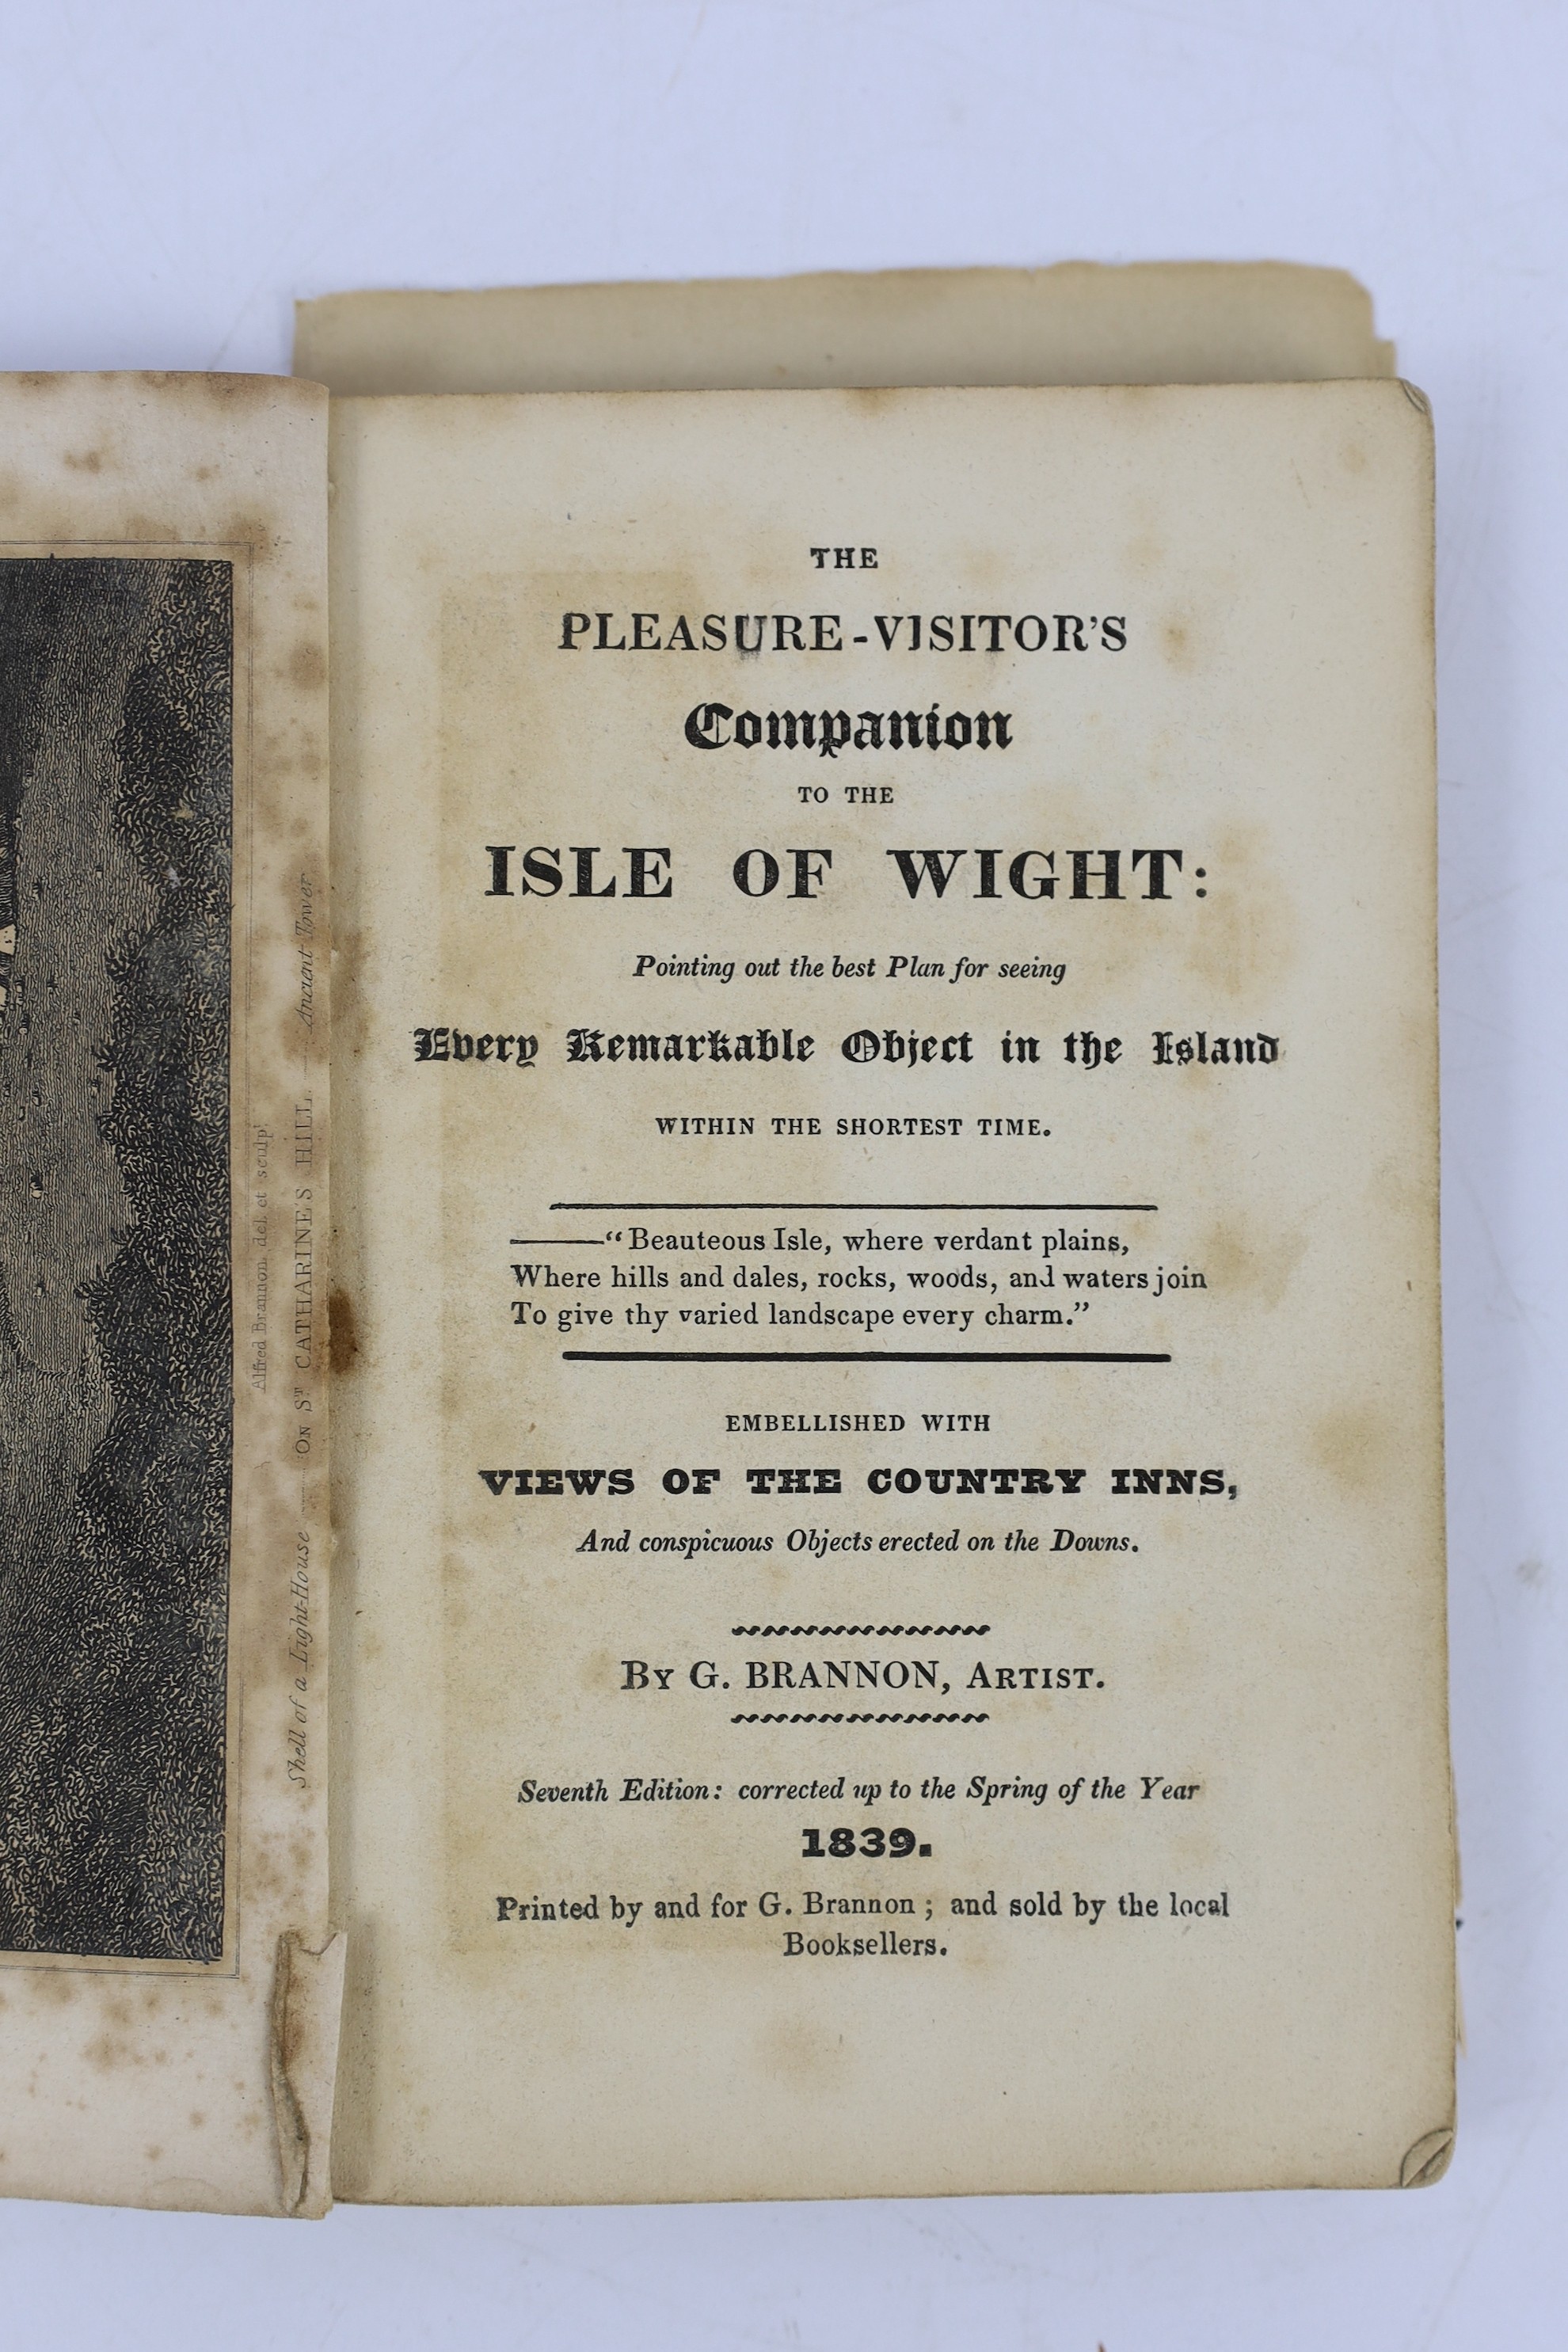 ° ° ISLE OF WIGHT: Bullar, John - A Historical and Picturesque Guide to the Isle of Wight. 5th - Image 2 of 7